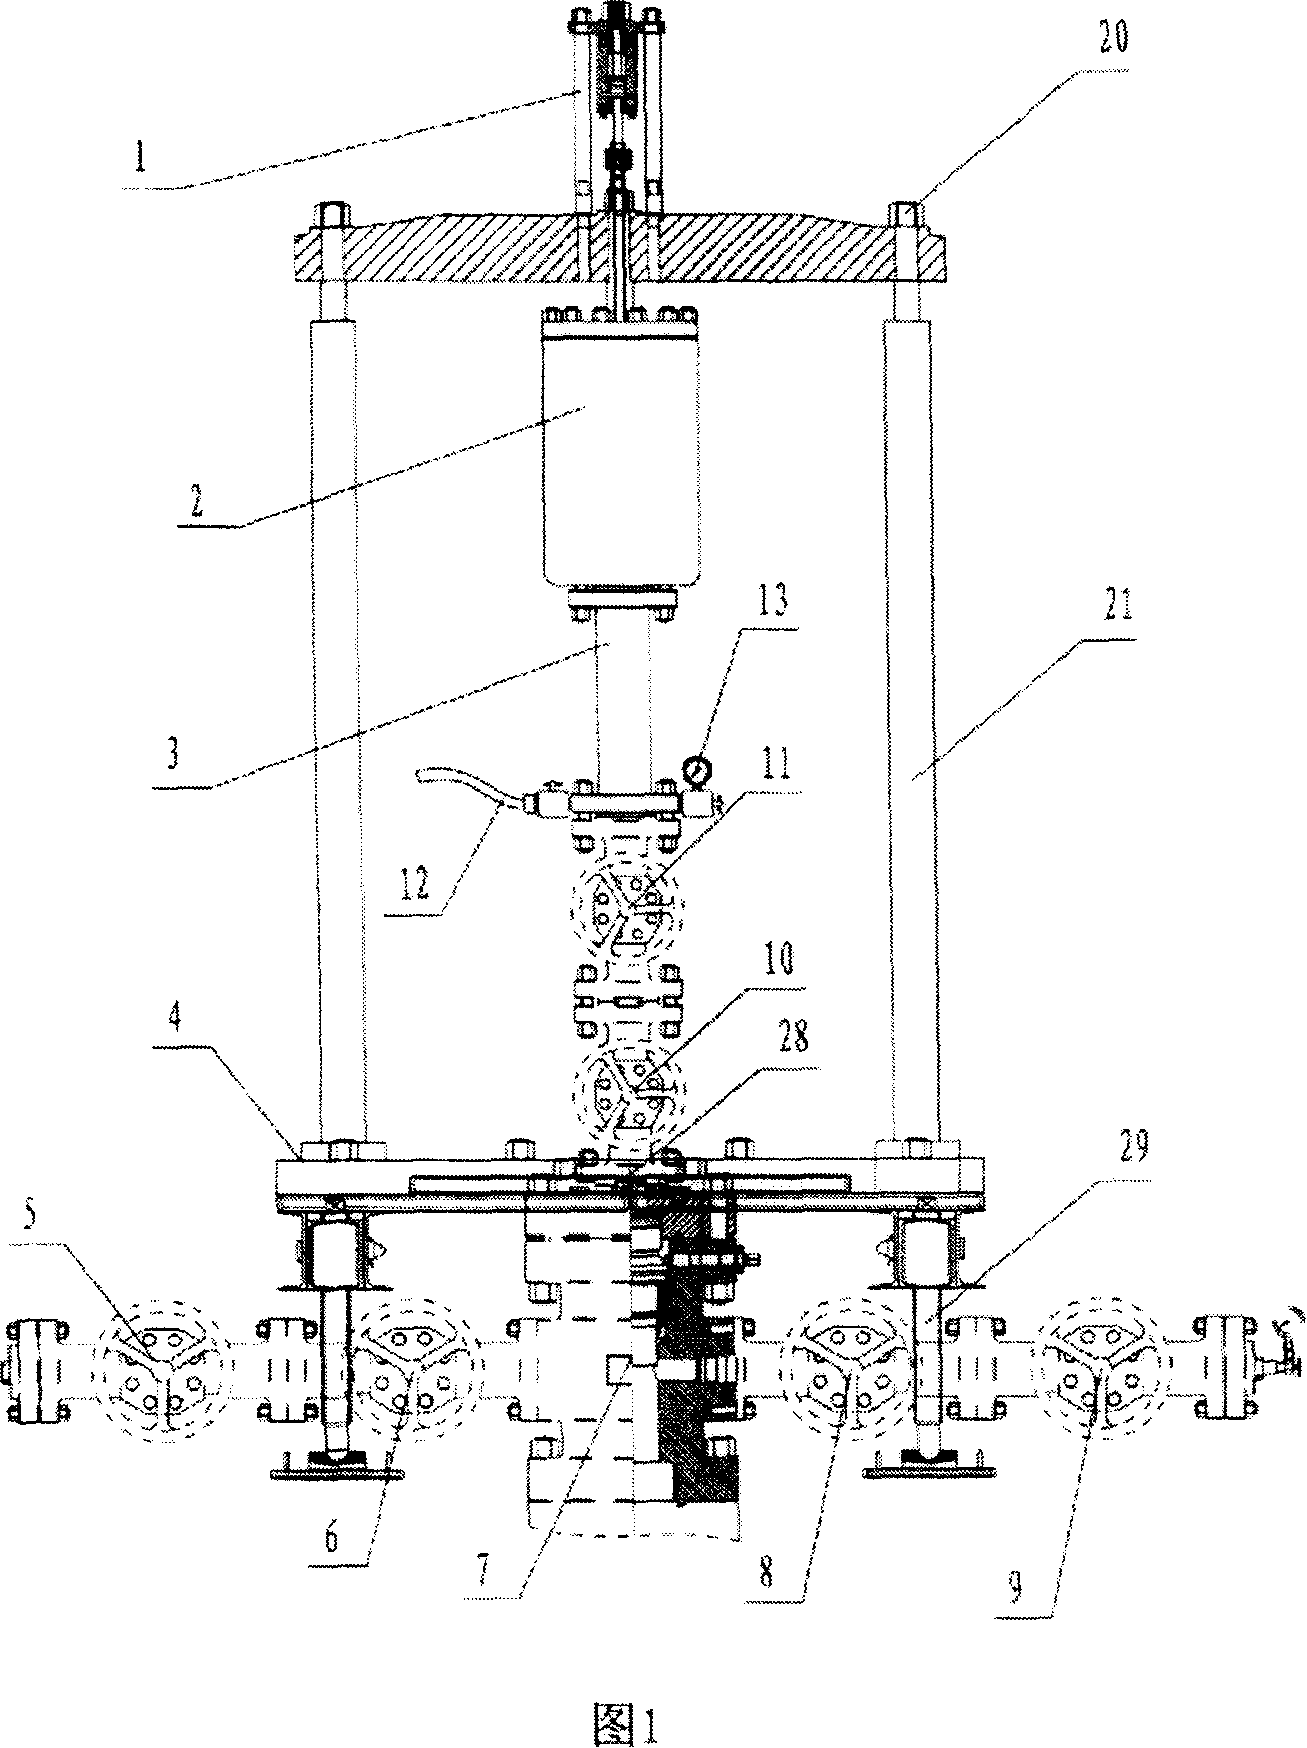 Well control method for changing valve under pressure